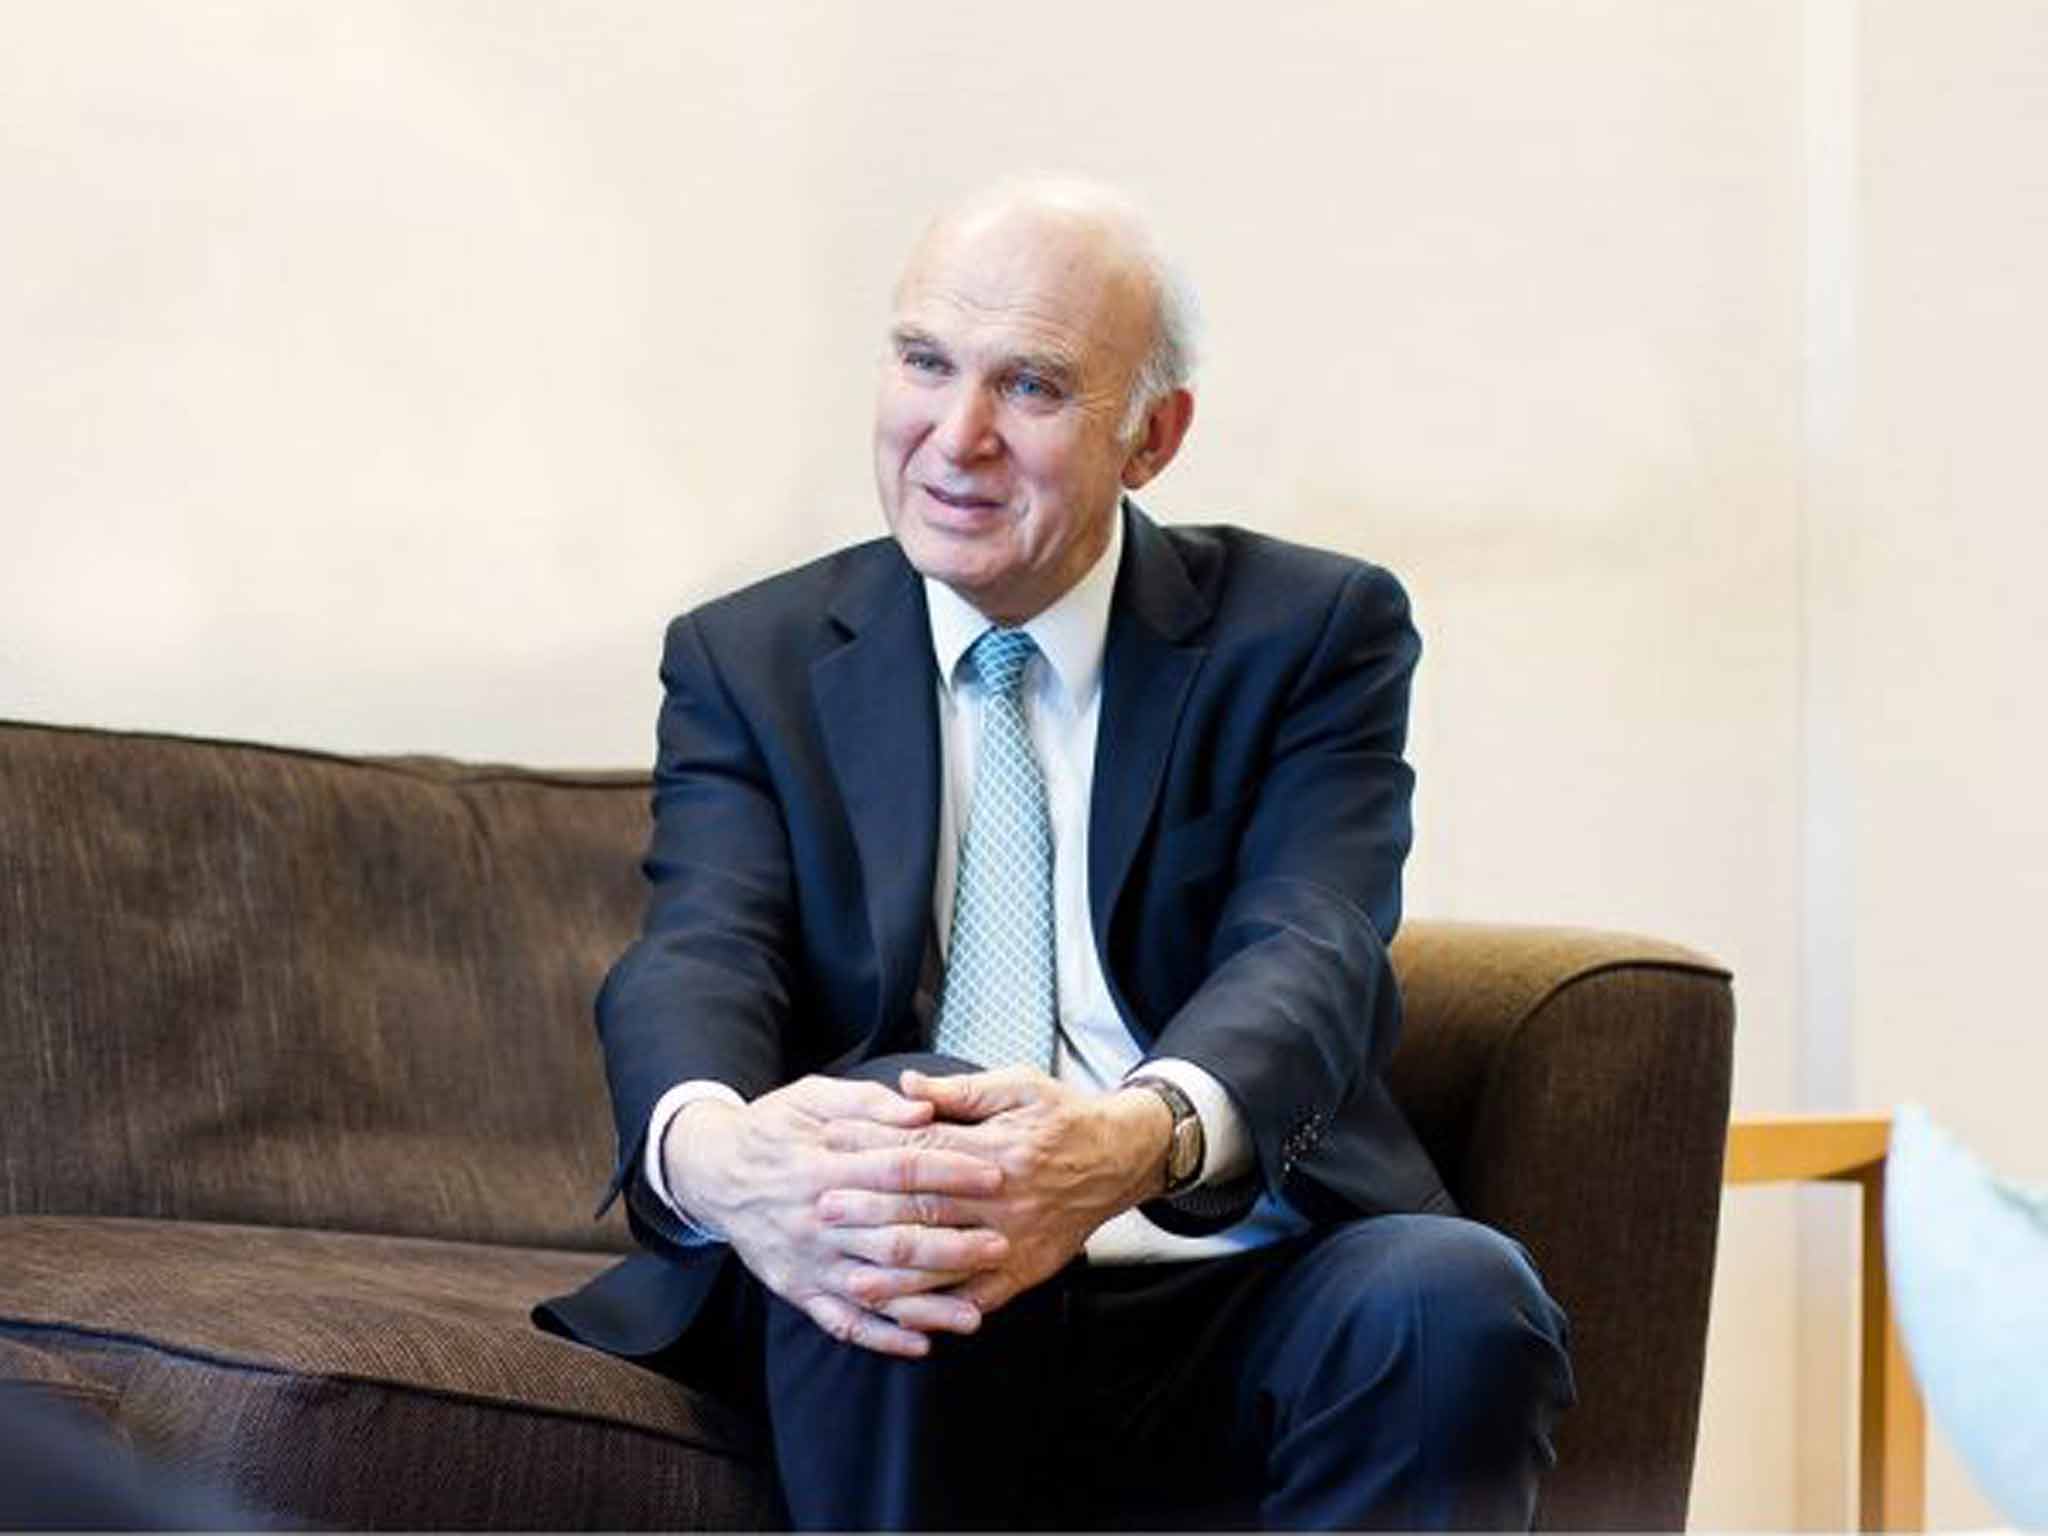 Sir Vince Cable will be appearing at Write on Kew literary festival on 24 September